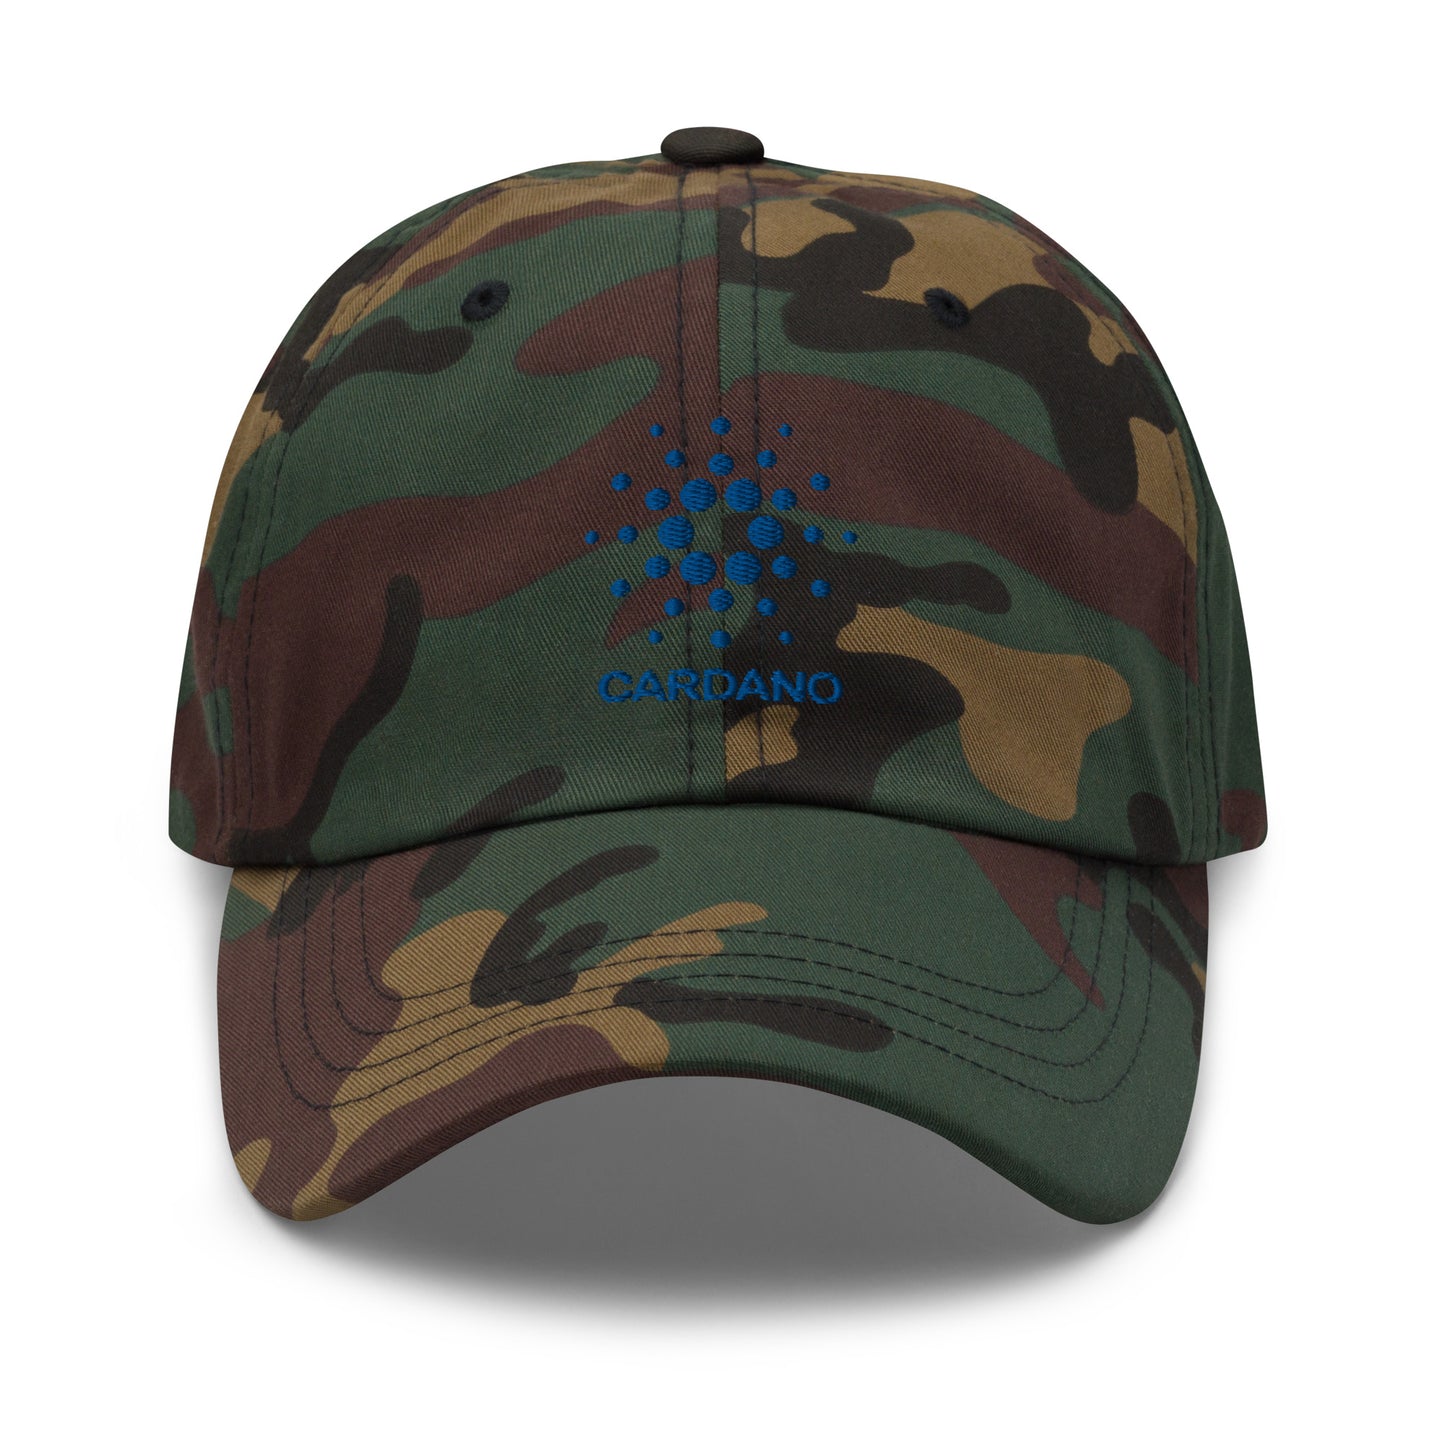 Cardano Dad hat - Hodlers Crypto Merch Brand